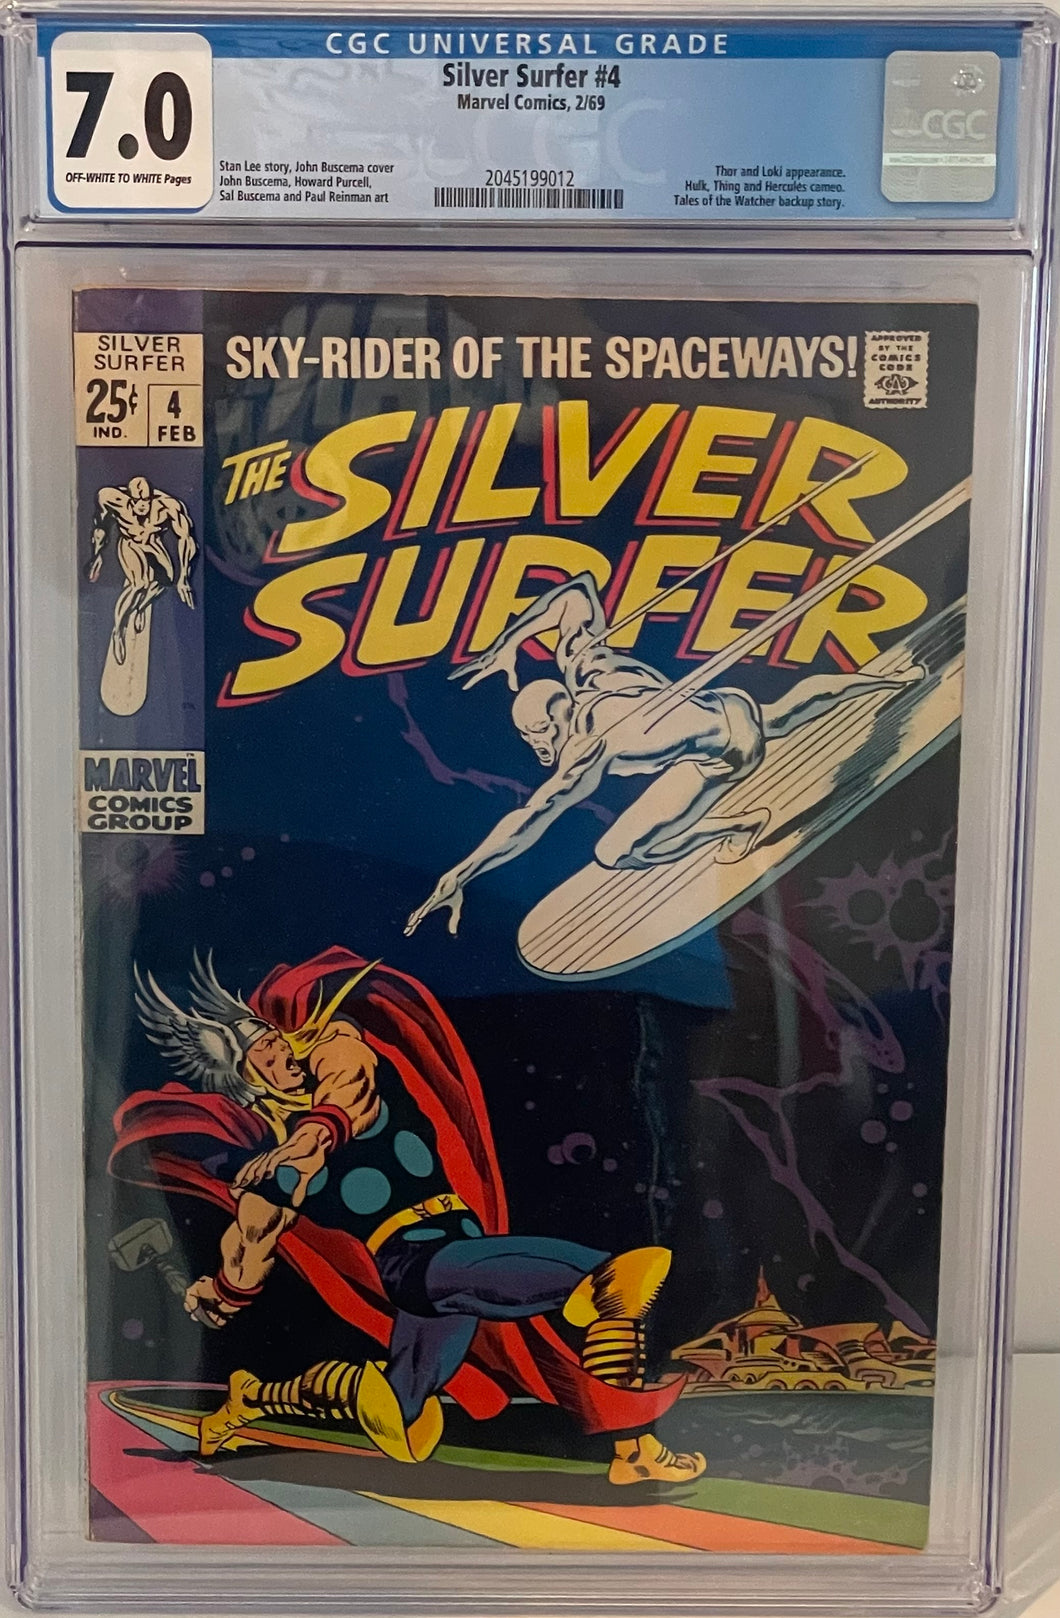 The Silver Surfer #4 7.0 CGC